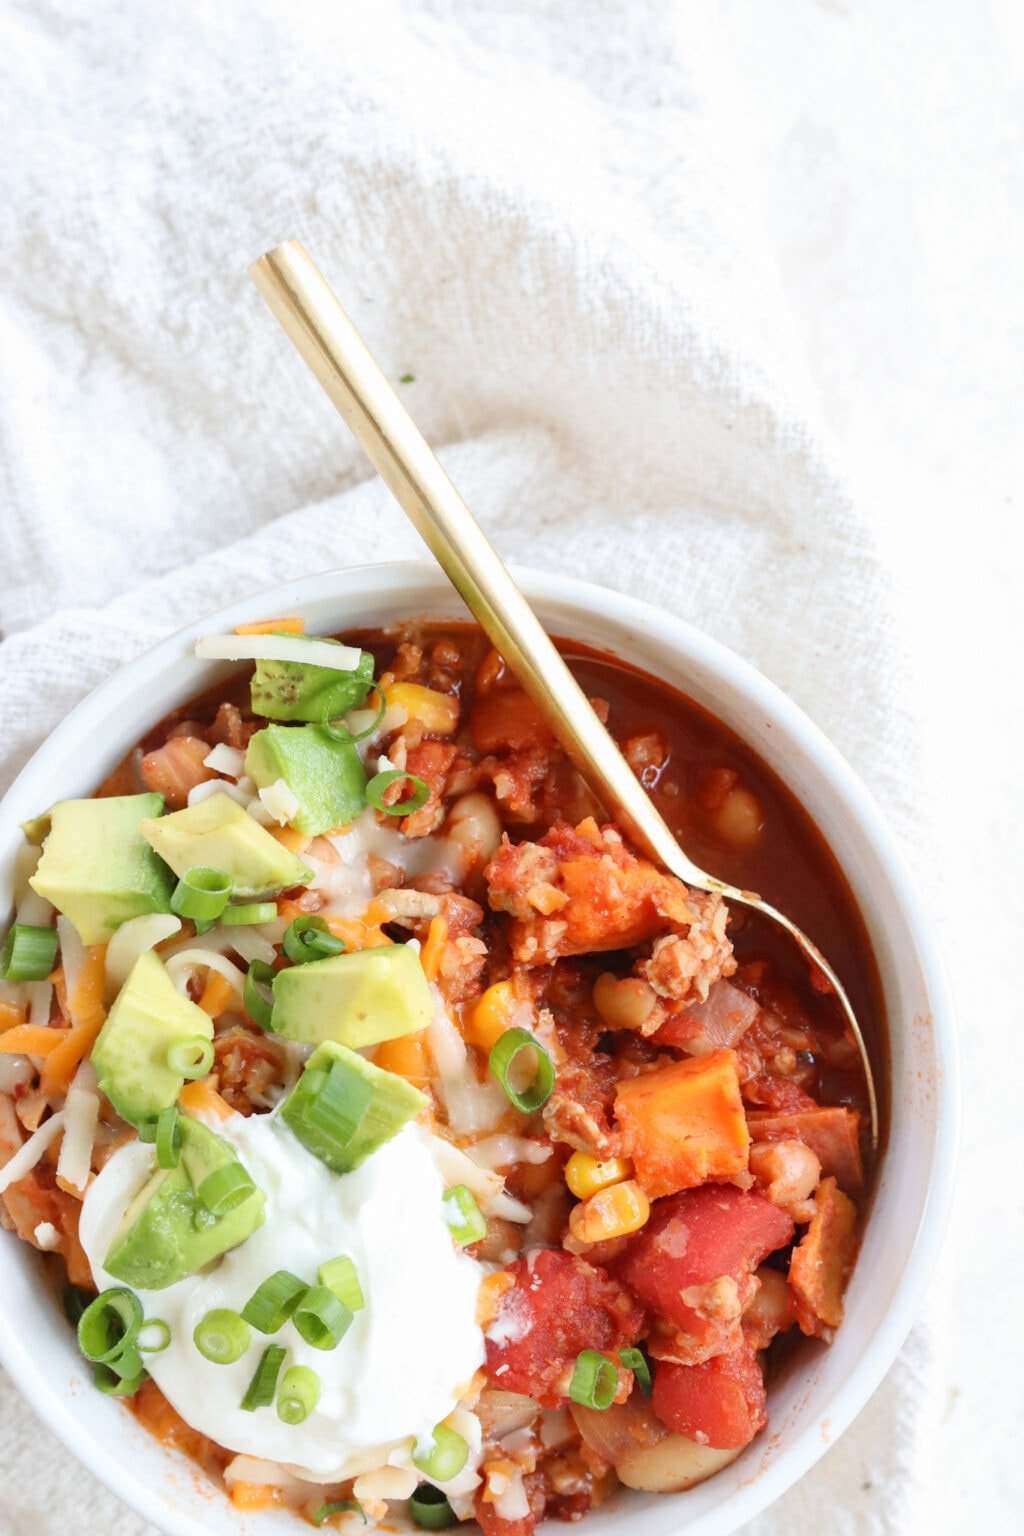 Slow Cooker Sweet Potato & Turkey Chili in a white bowl on a white table cloth